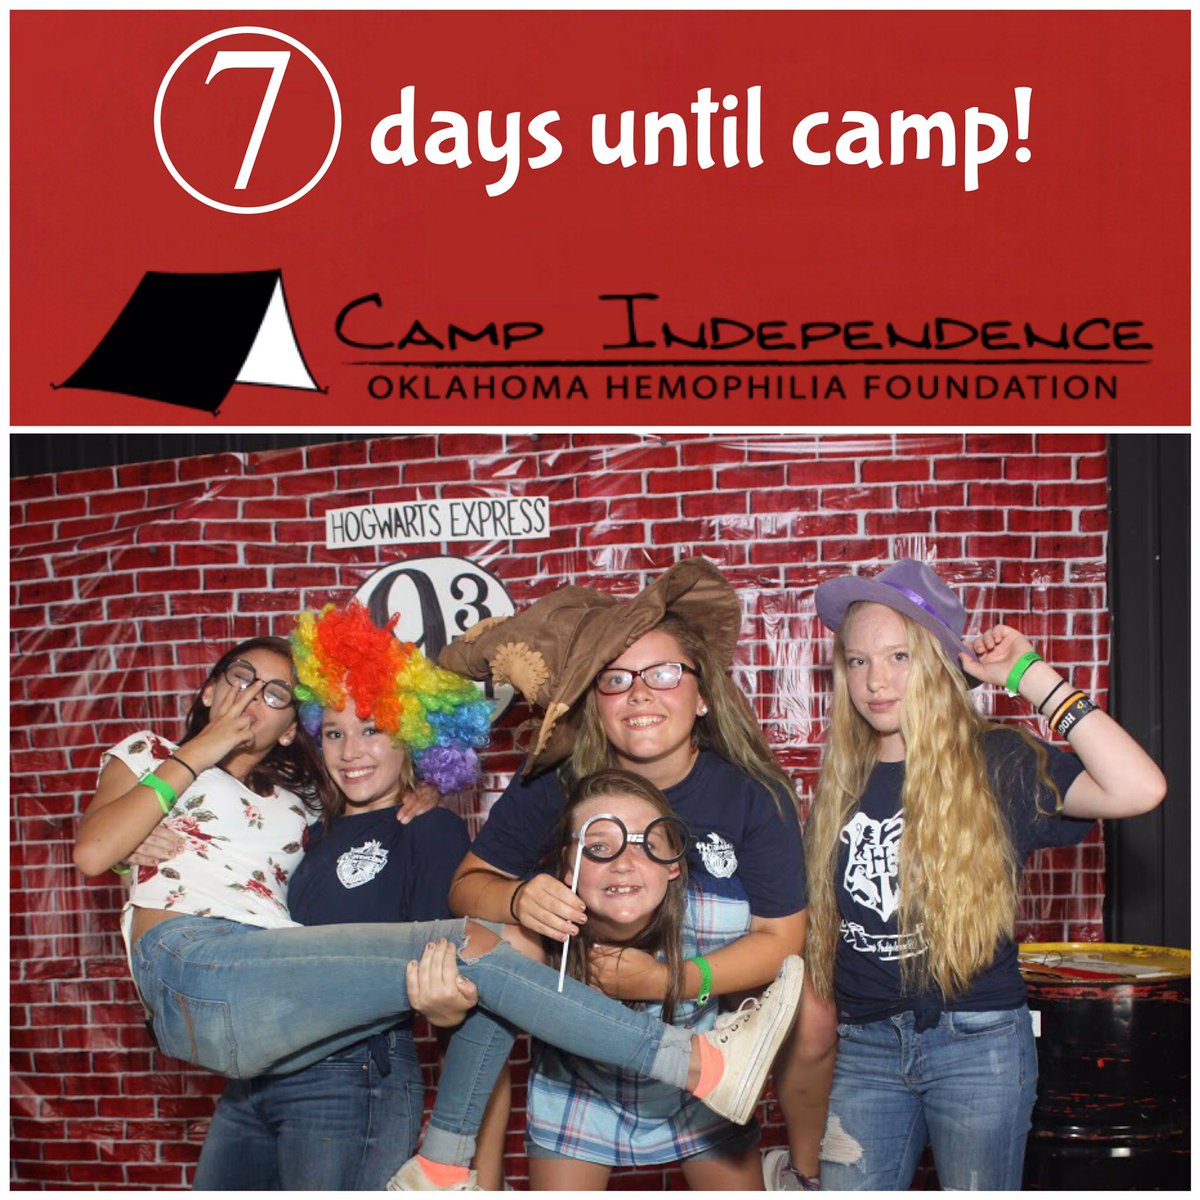 🏕7 days until Camp Independence! ❤️
What are you looking forward to the most? 
#CampIndependenceOHF
#OklahomaHemophiliaFoundation
#BleedingDisorders
#Hemophilia
#VonWillebrands 
#FactorDeficiency
#Oklahoma
#OKHemophilia